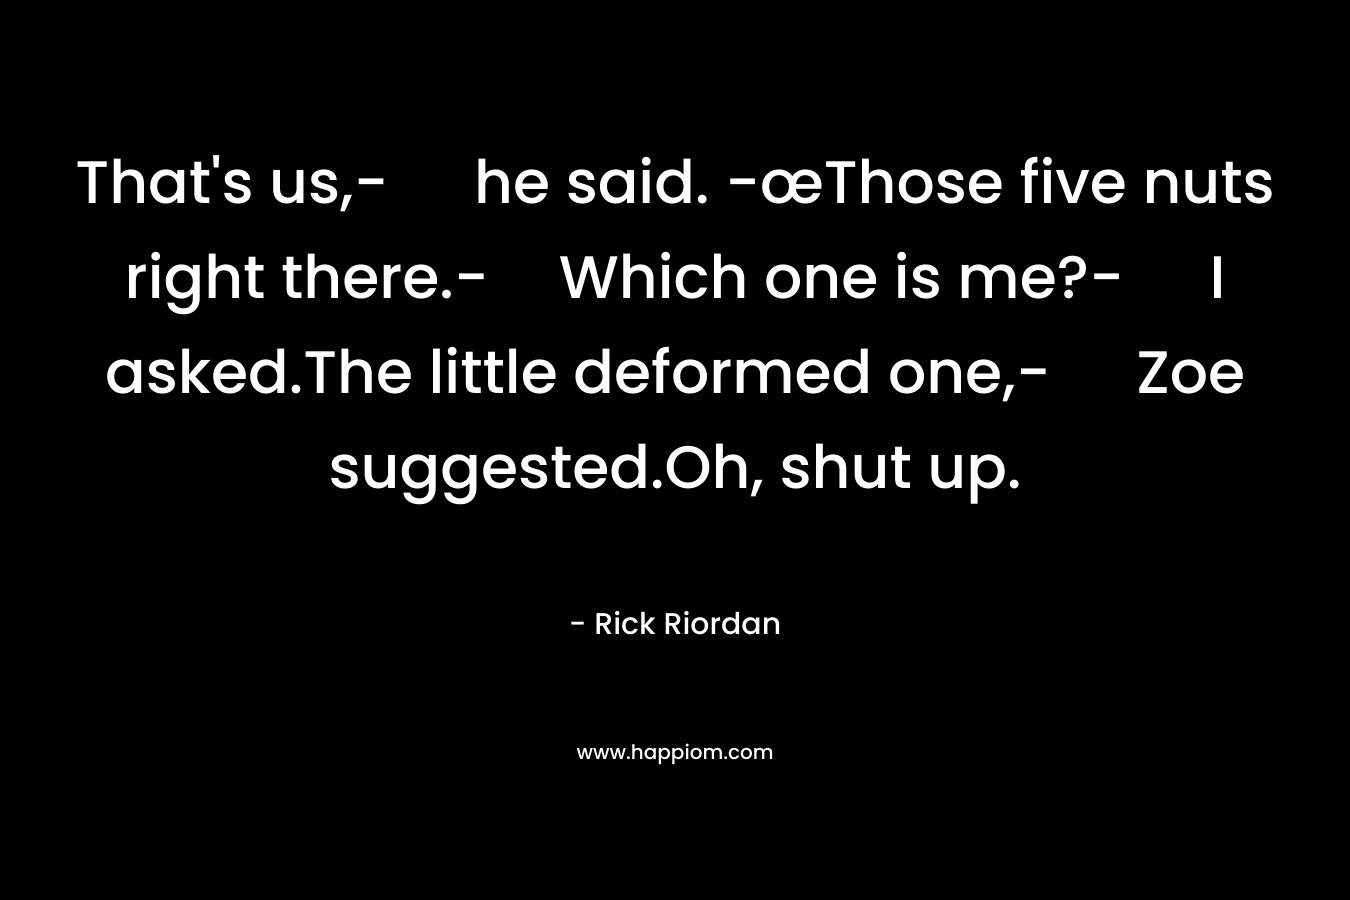 That’s us,- he said. -œThose five nuts right there.-Which one is me?- I asked.The little deformed one,- Zoe suggested.Oh, shut up. – Rick Riordan